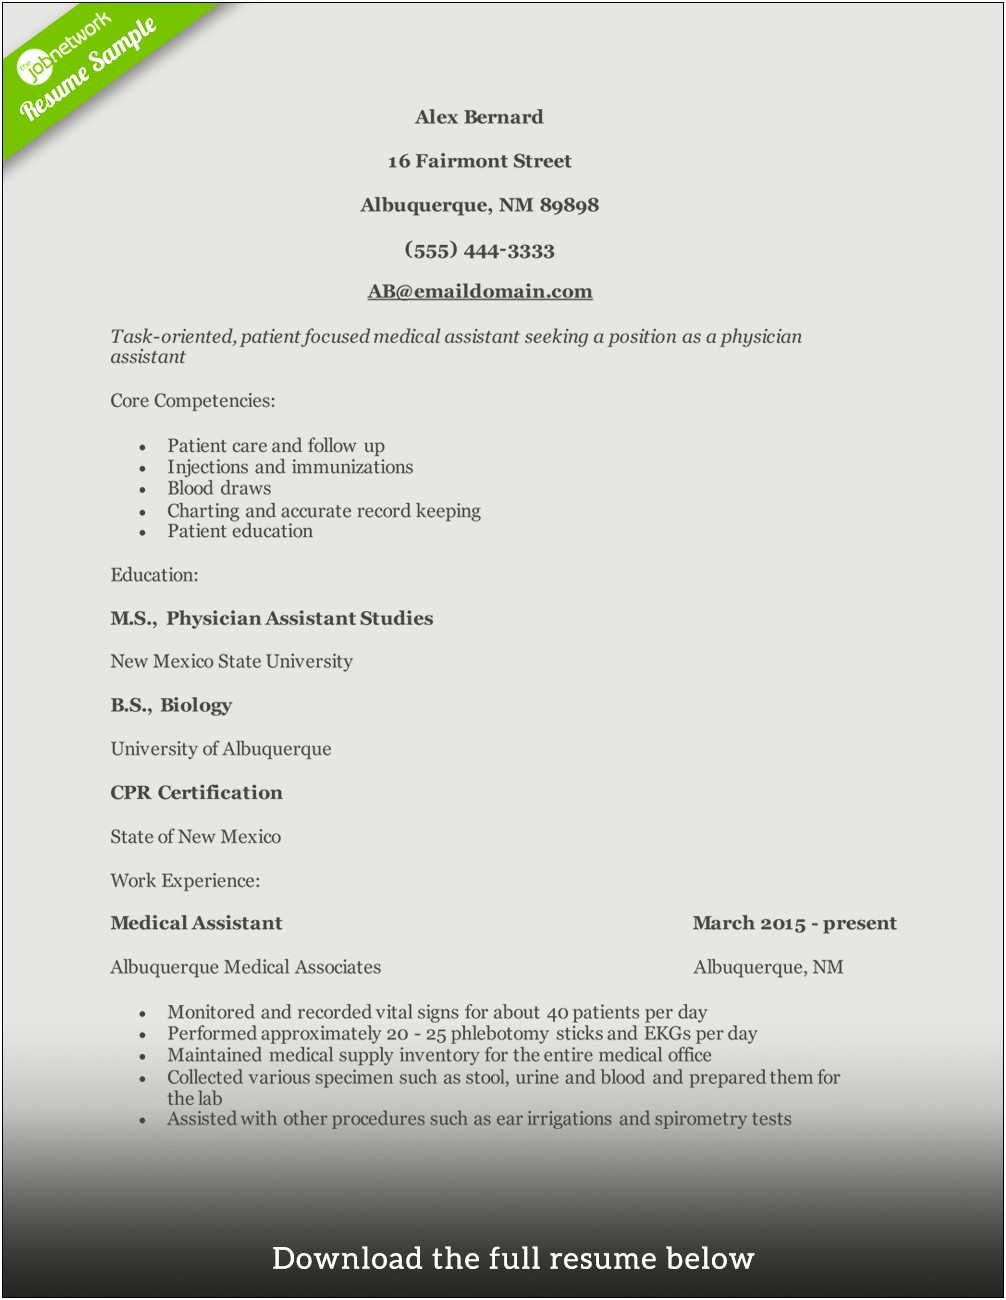 Sample Resume Objective Statements For Entry Level